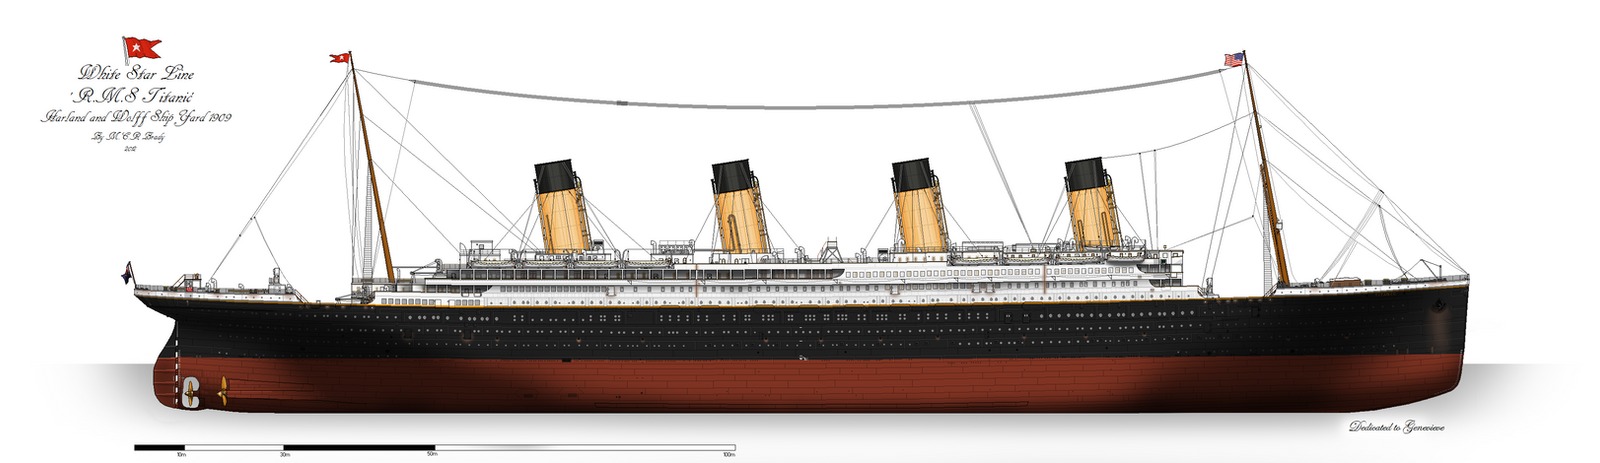 RMS Titanic: Profile. (1912) by alotef on DeviantArt